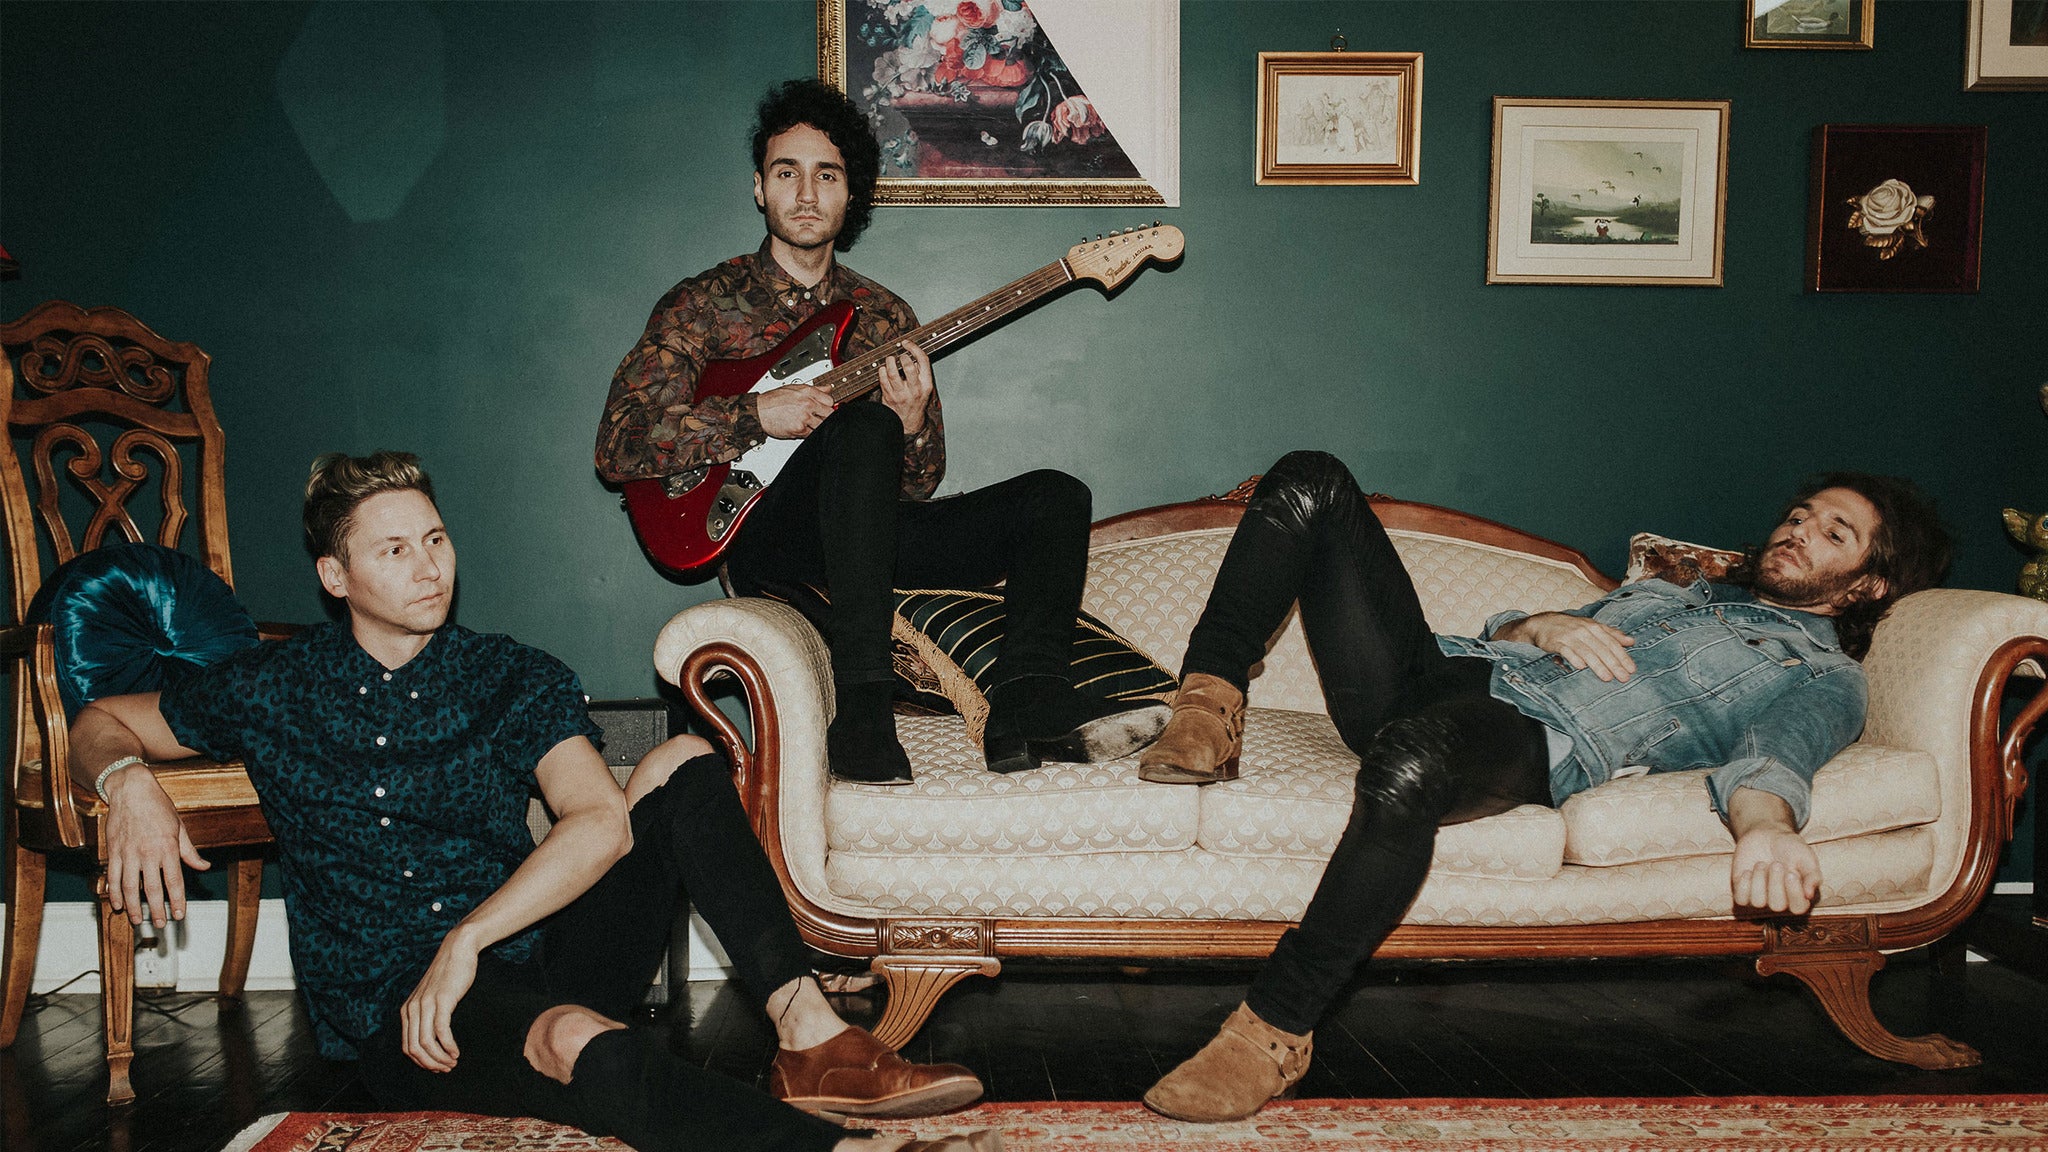 Smallpools presale code for event tickets in Philadelphia, PA (The Foundry)